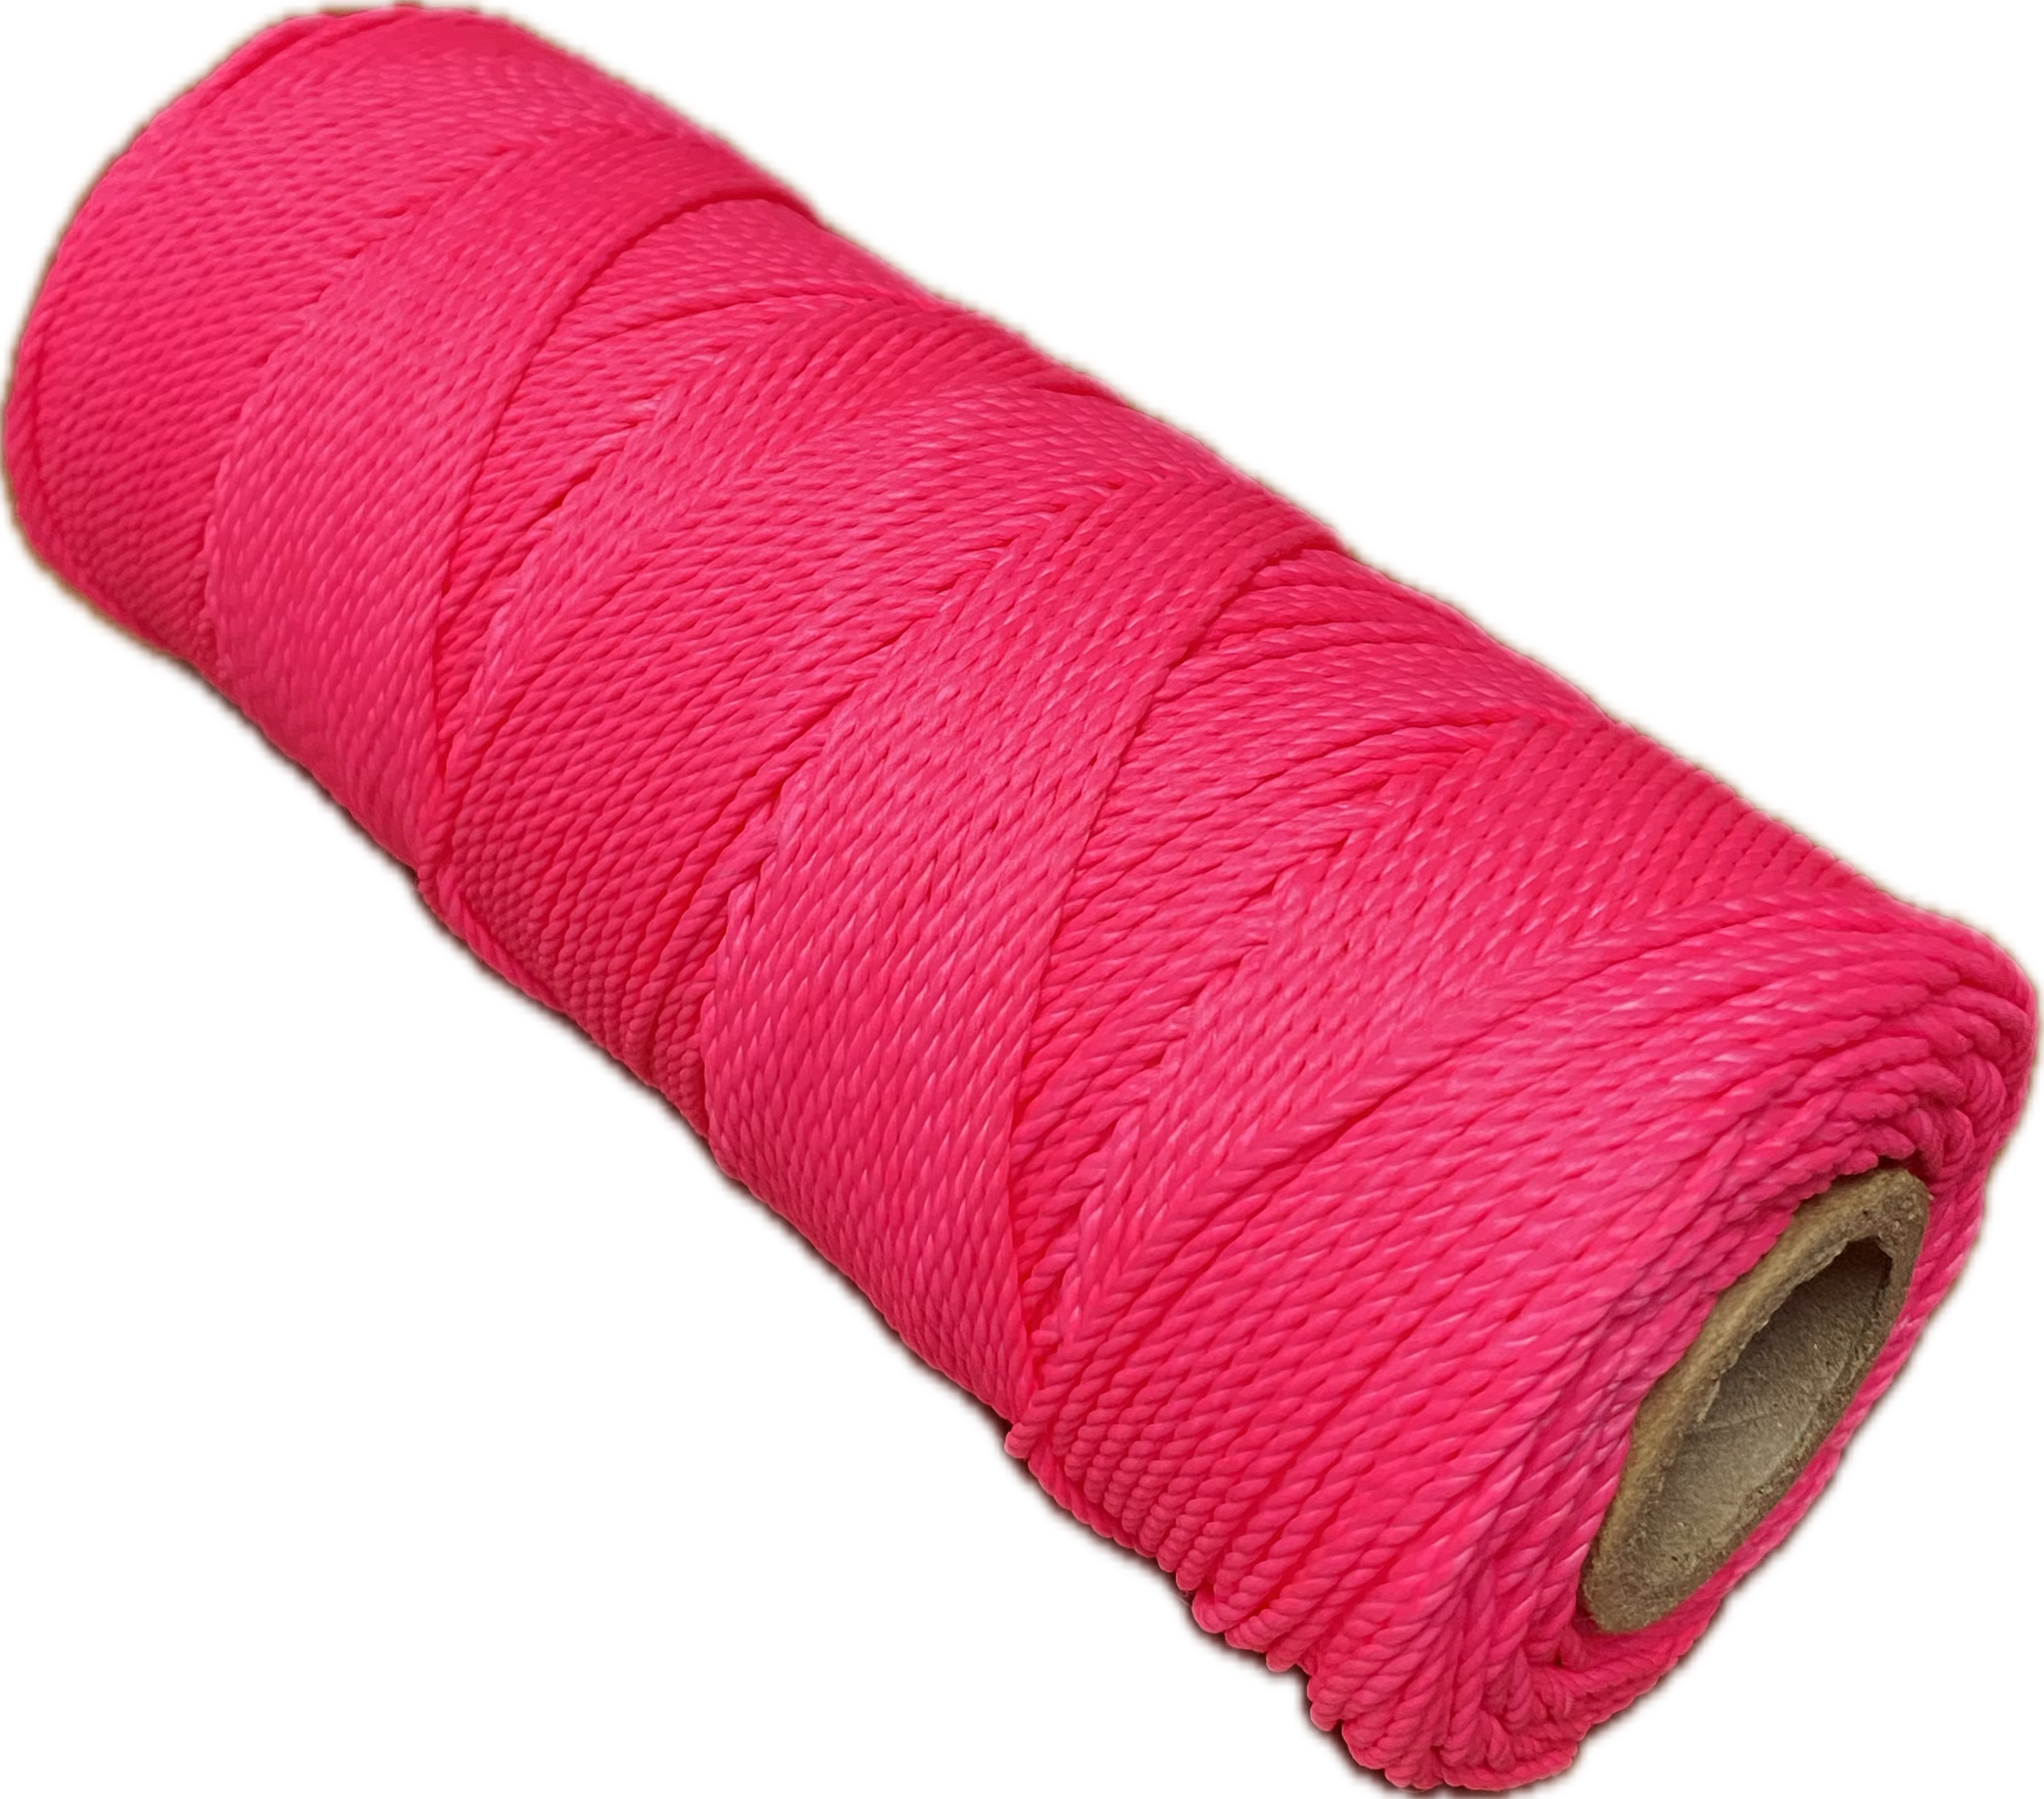 #18 x 550ft Glo-Pink Twisted String Line - Utility and Pocket Knives